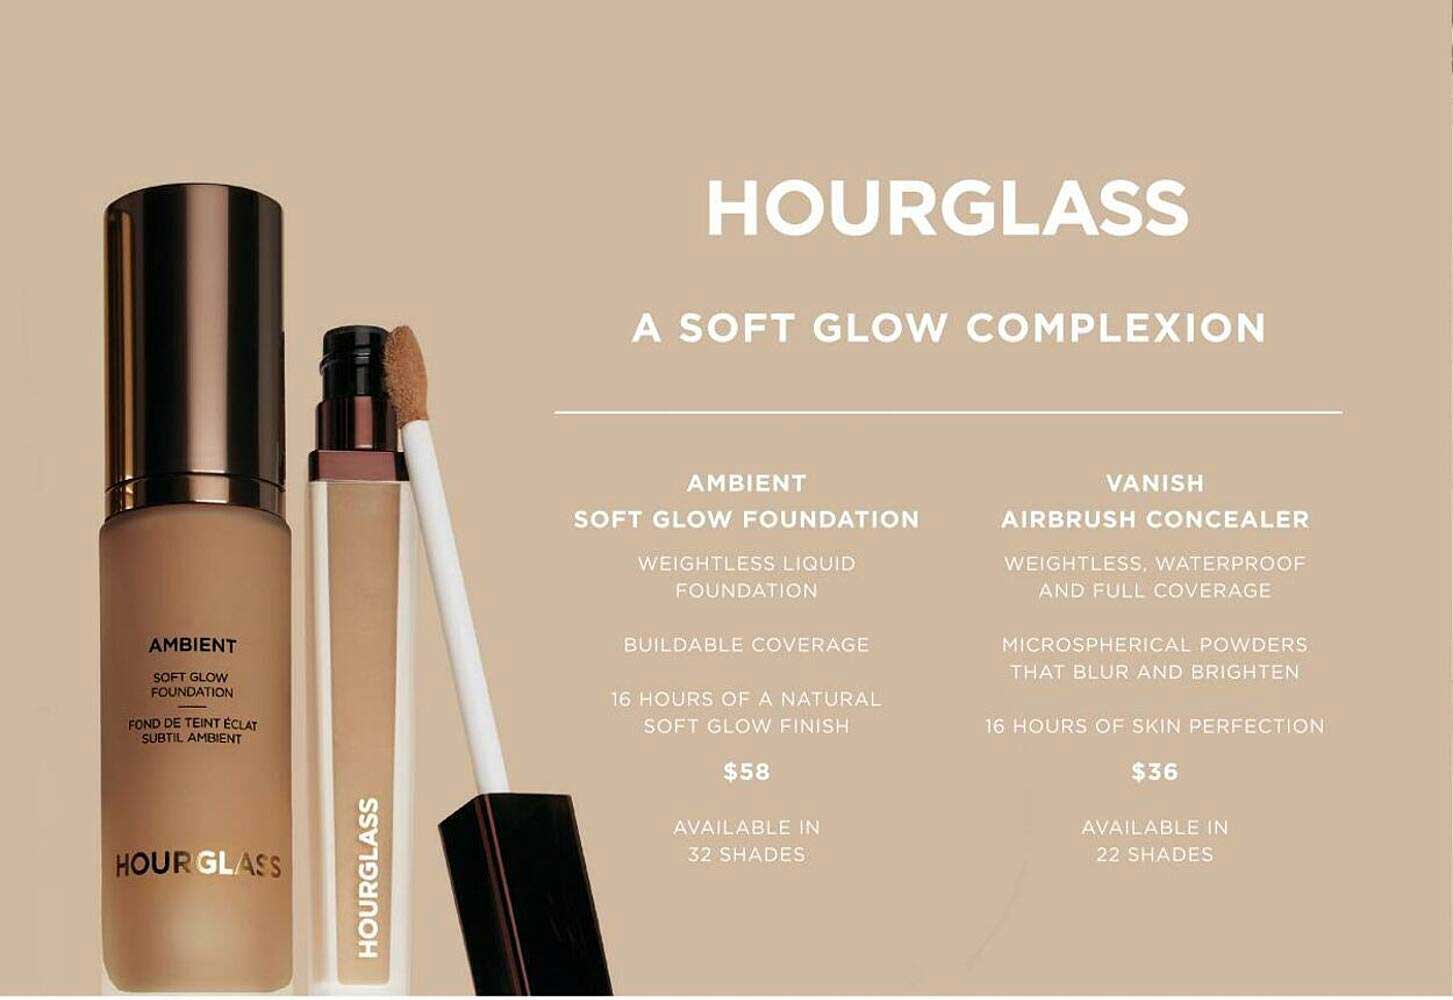 Ulta Beauty Hourglass Ambient Soft Glow Foundation Or Vanish Airbrush Concealer